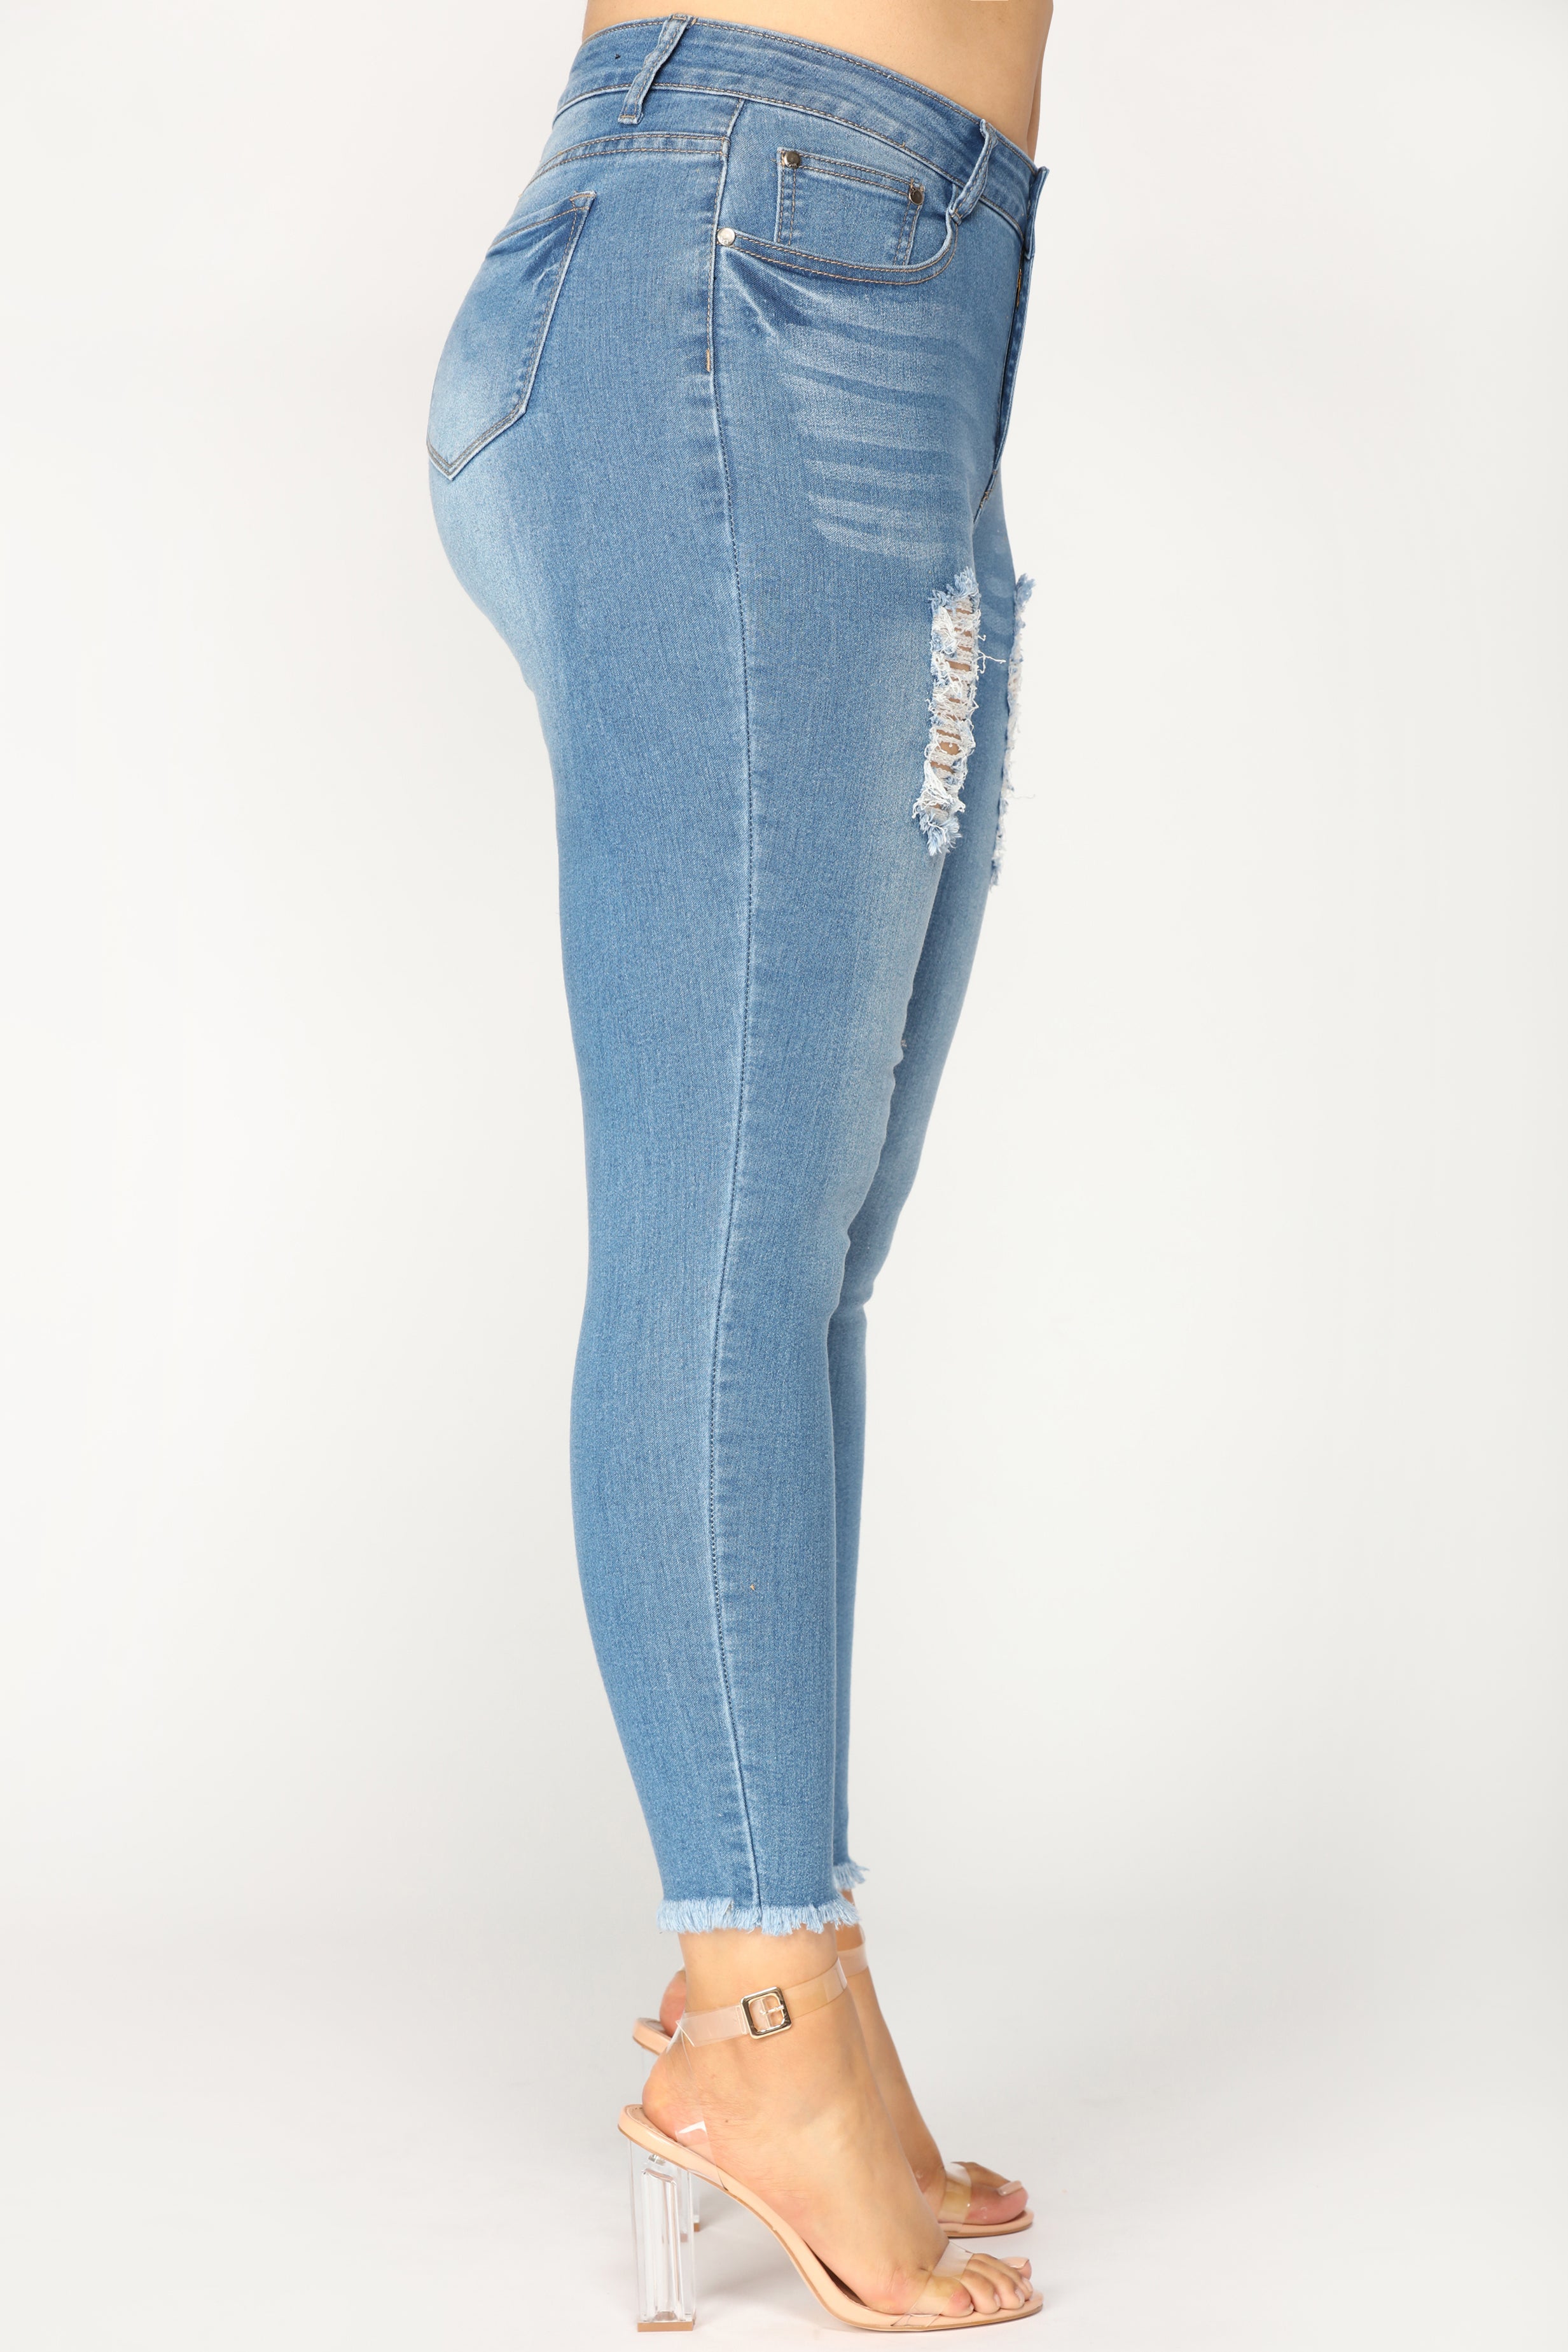 Decadence Ankle Jeans - Light Blue Wash